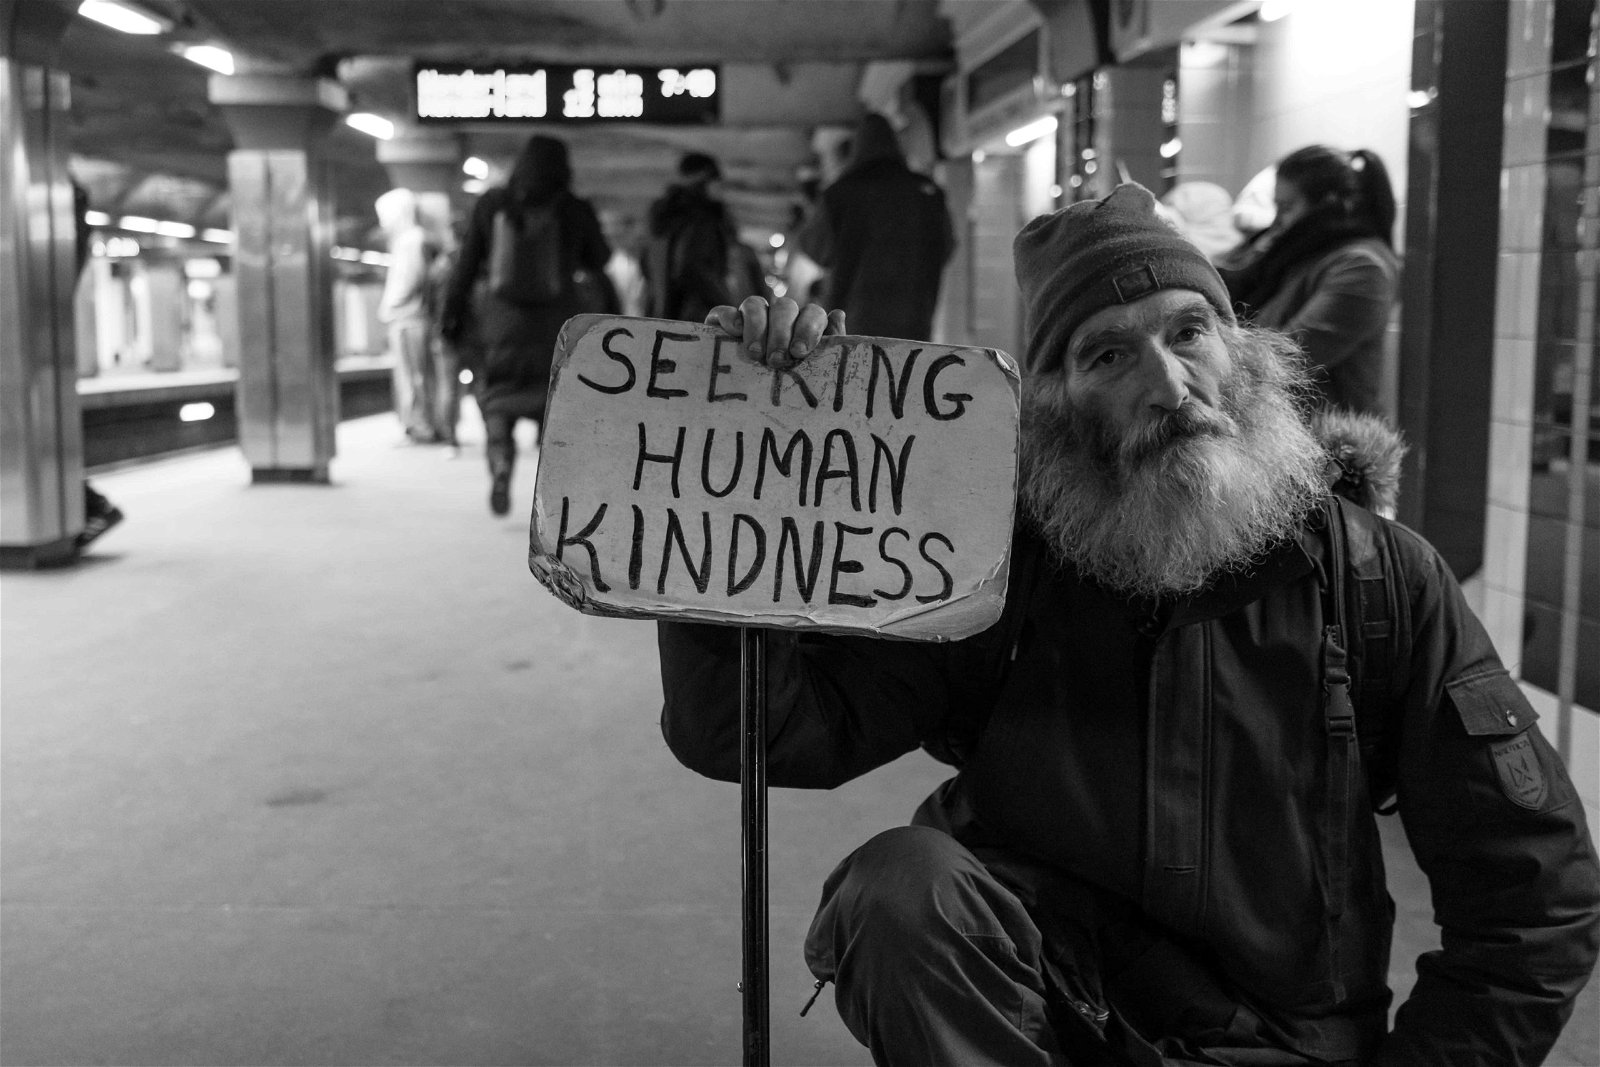 Street photography, such as this image of a homeless man, often produces raw, emotional images.